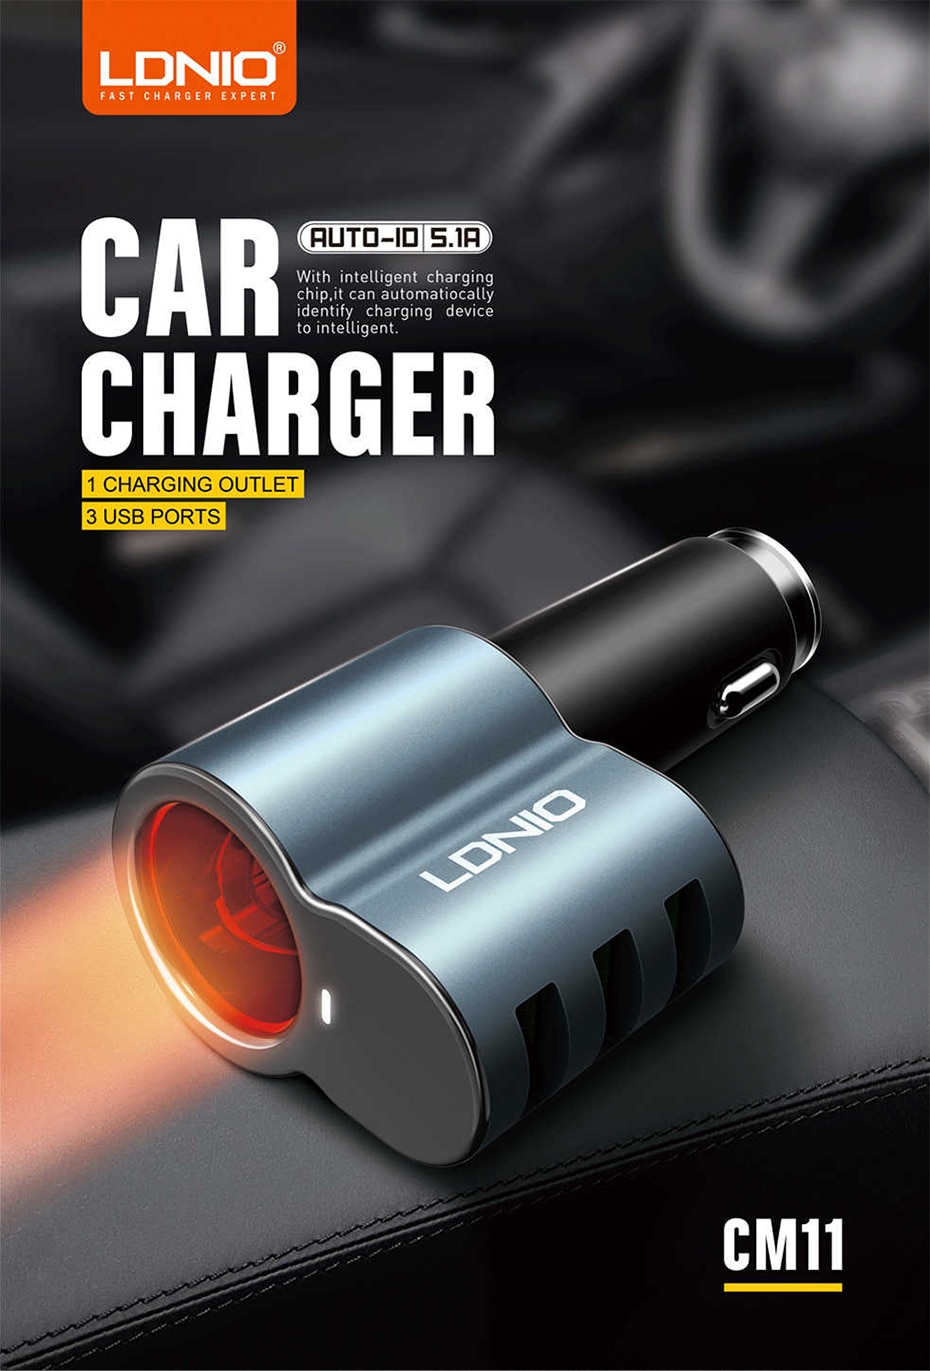 LDNIO Car charger with cigratte socket (1)